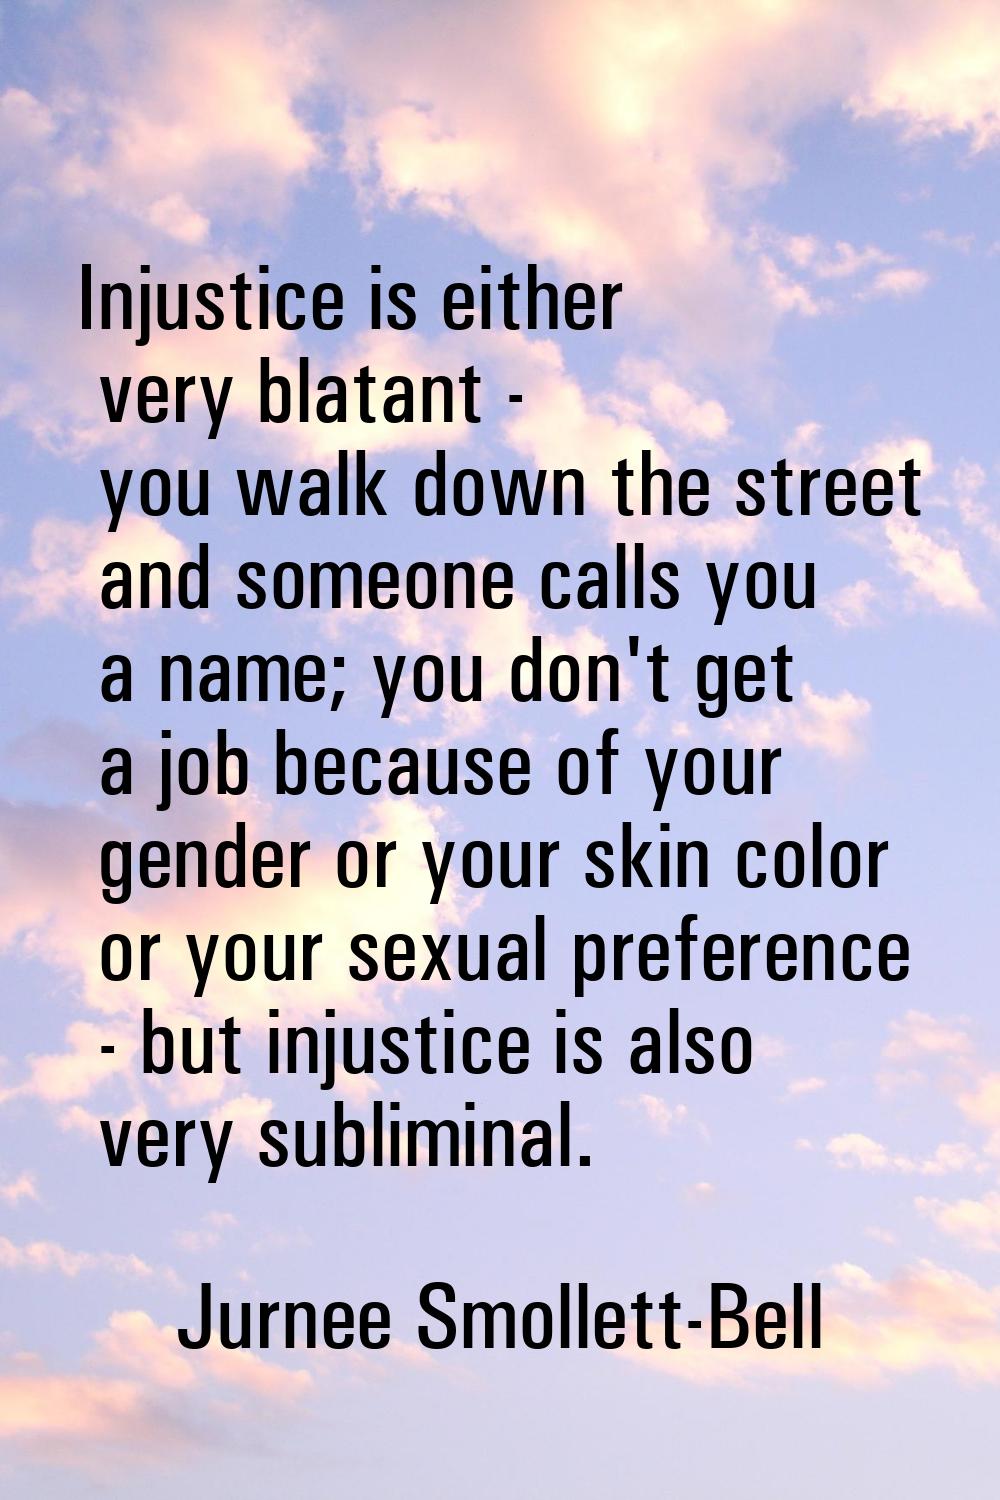 Injustice is either very blatant - you walk down the street and someone calls you a name; you don't